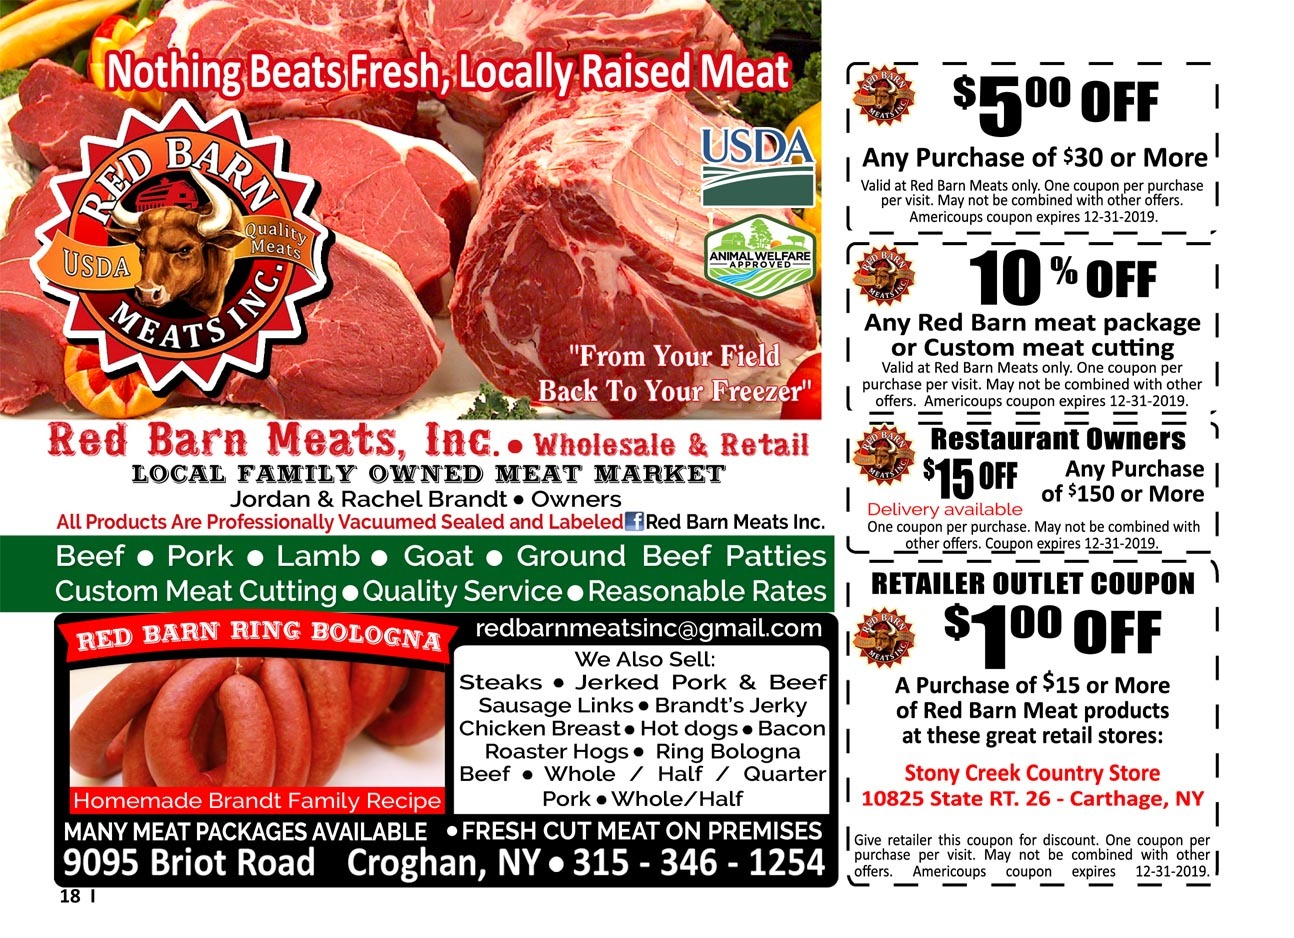 Red Barn Meats image